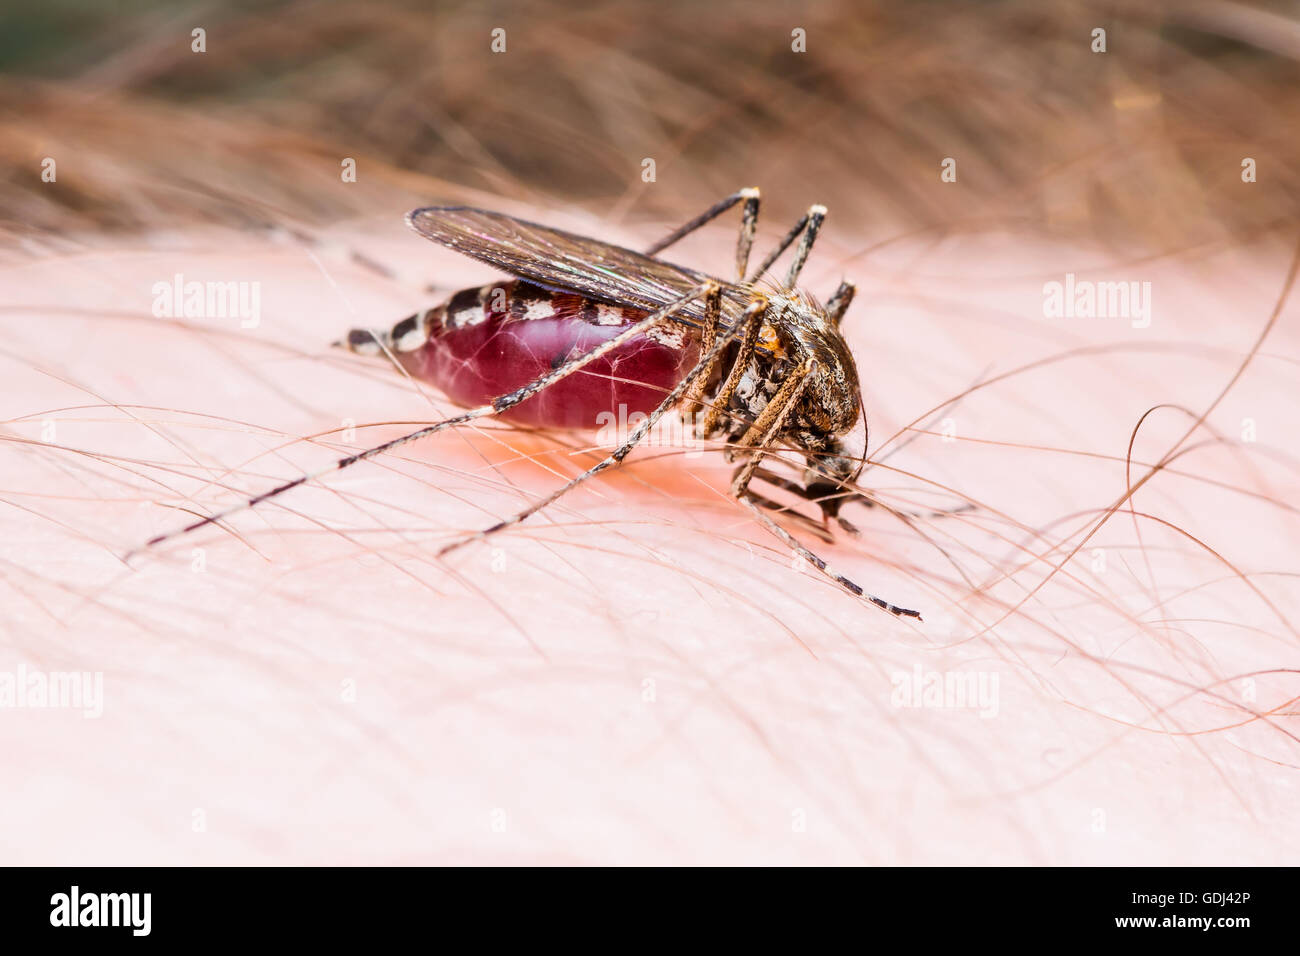 Mosquito full of blood Stock Photo